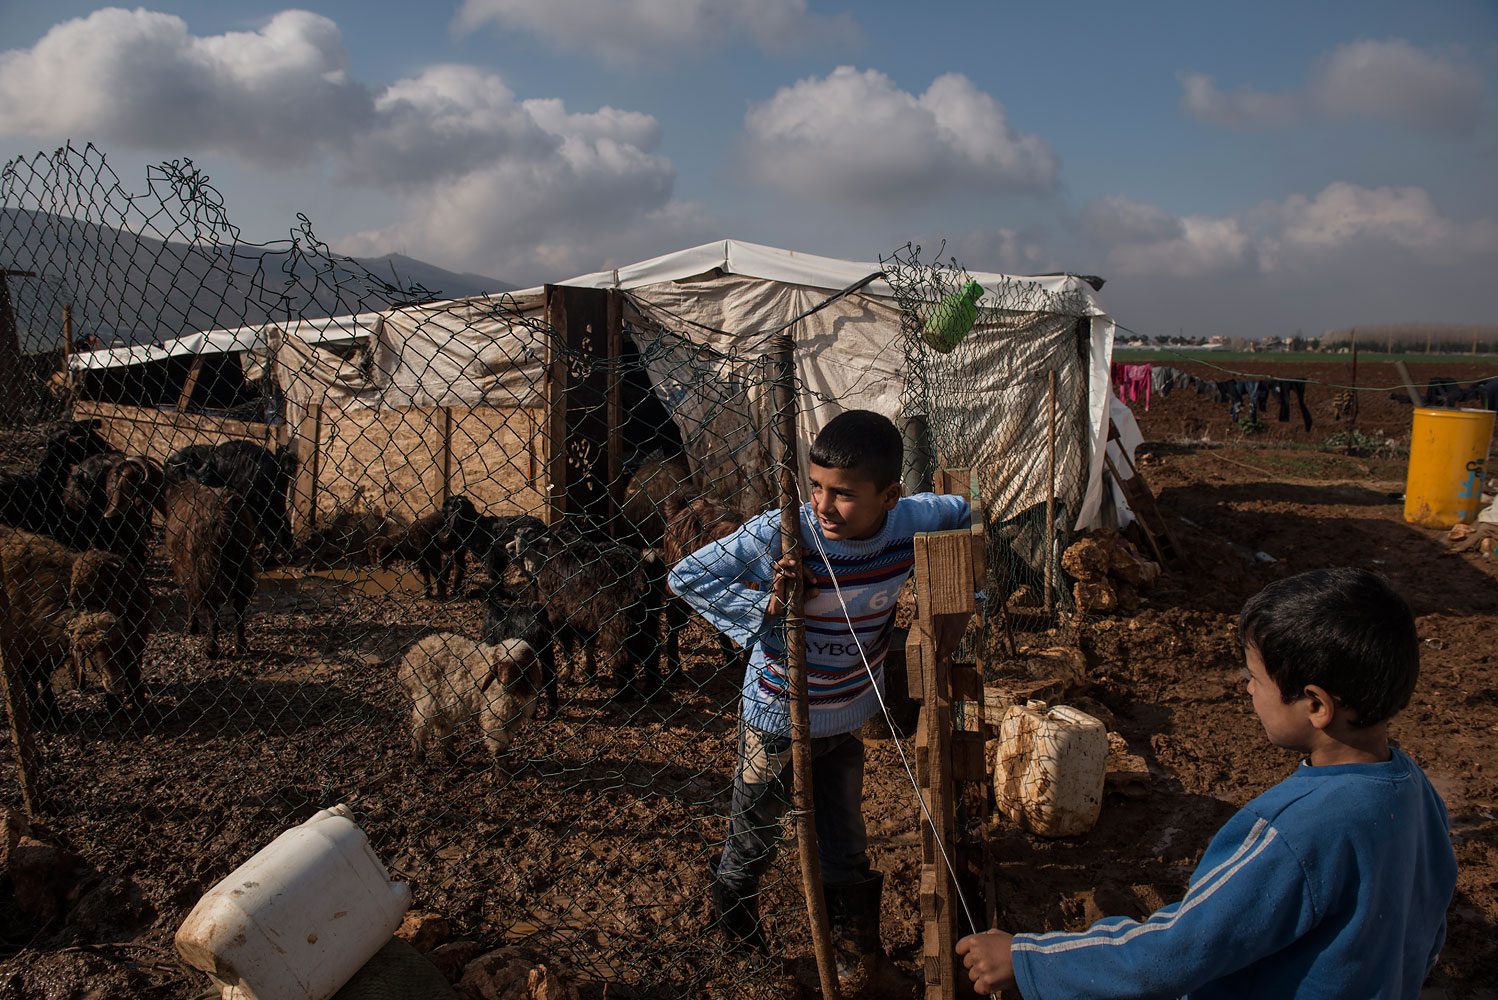 Syrian refugee, Khalid, 11, from Homs, tends to the familys goats at a tented settlement in Turbide in the Bekaa Valley, Lebanon, March 14, 2014.